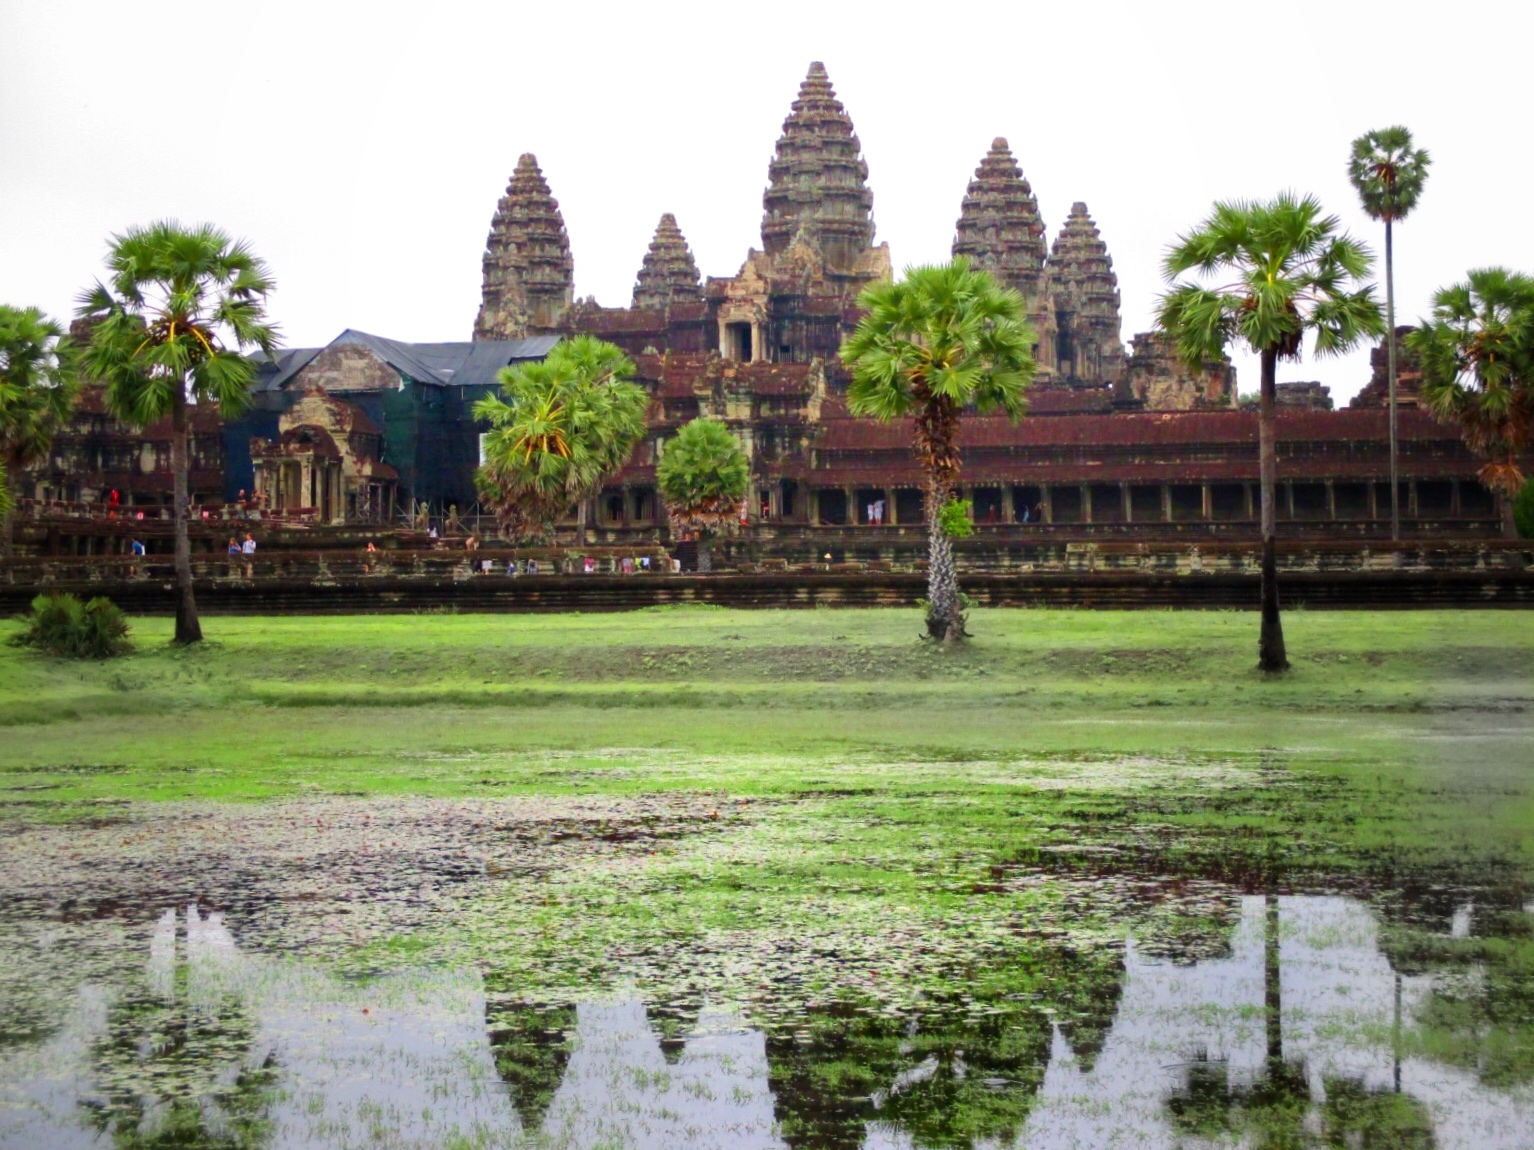 Reflection Pond is the proof why Angkor Wat is an ancient architectural marvel